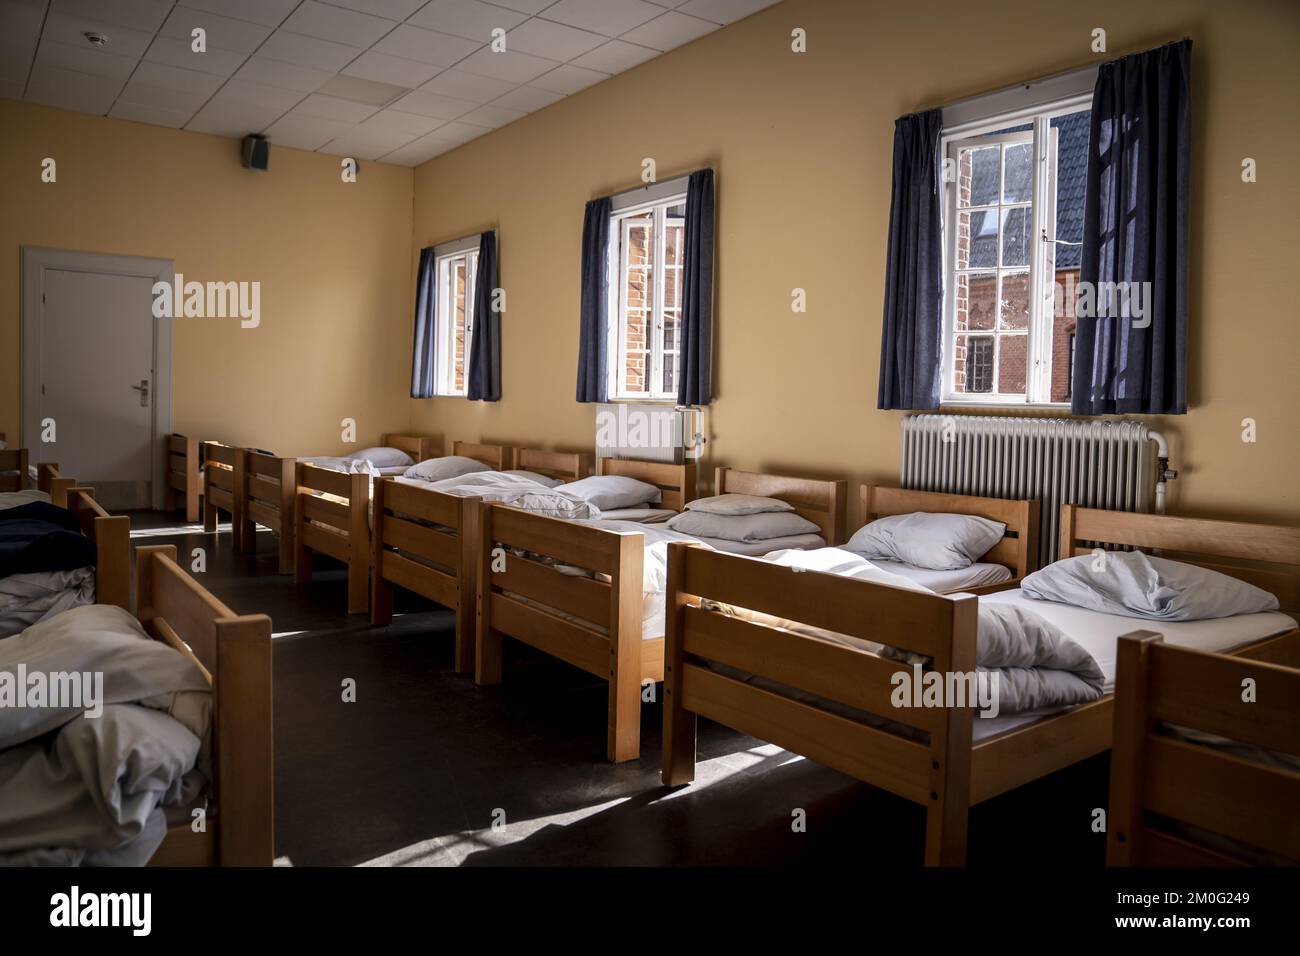 Dormitory at Herlufsholm School and Estate, Wednesday 19 May 2021. This August, the Crown Prince Couple's eldest child, Prince Christian, will begin his high school education at Herlufsholm Boarding School in Næstved. Herlufsholm School was founded on May 23rd in 1565. (Photo: Mads Claus Rasmussen / Ritzau Scanpix) Stock Photo